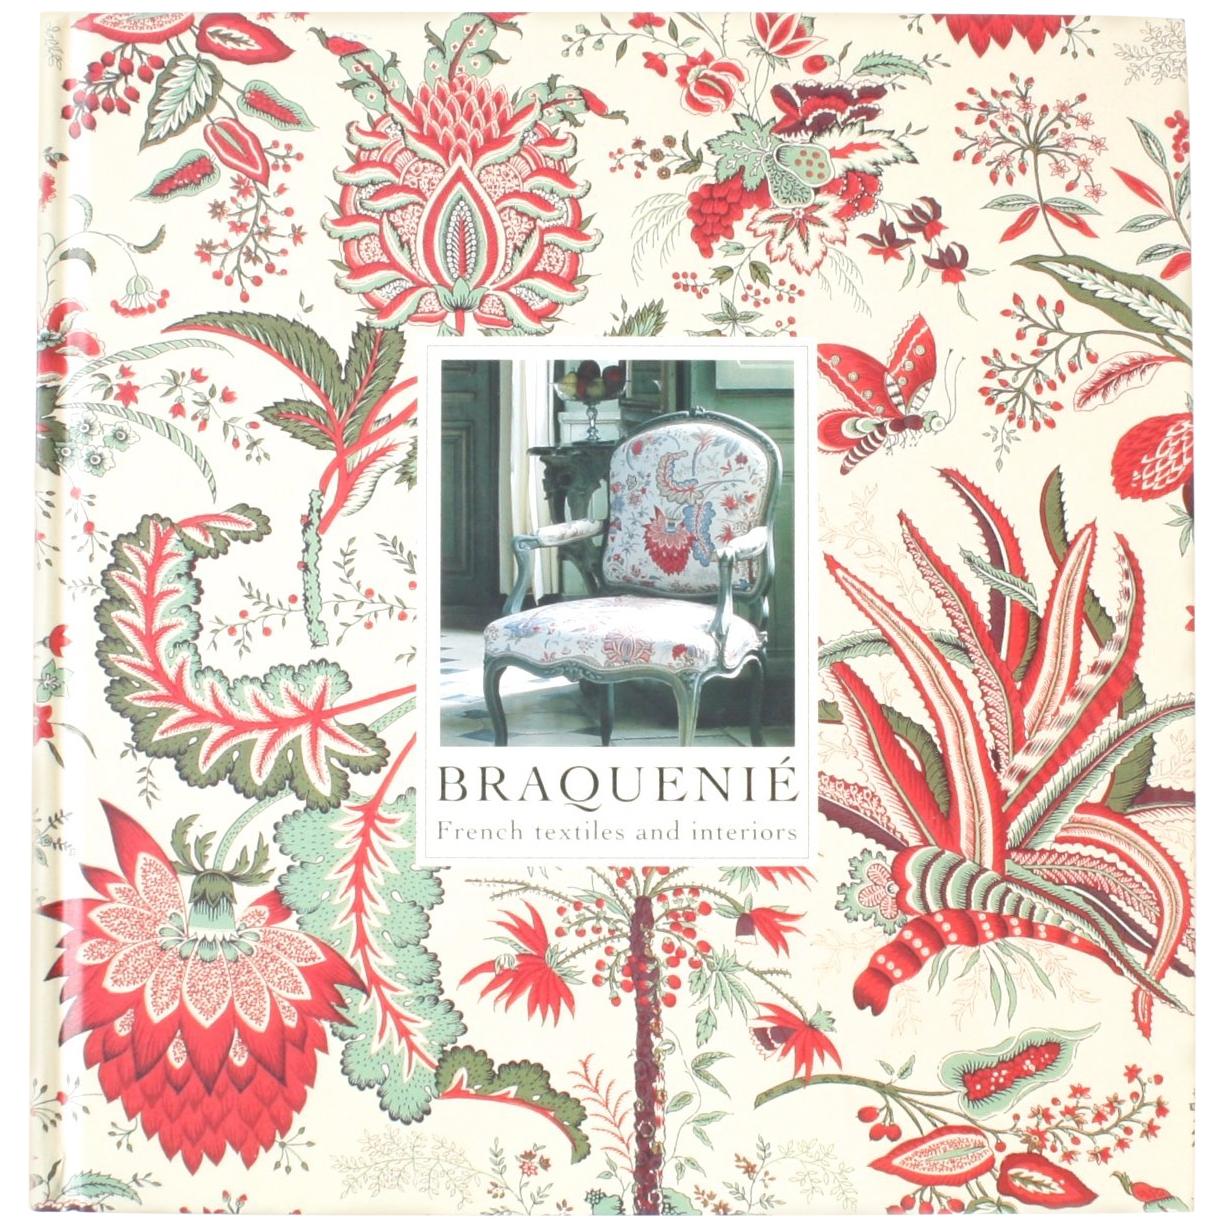 Braquenié French Textiles and Interiors since 1823, Jacques Sirat, First Edition